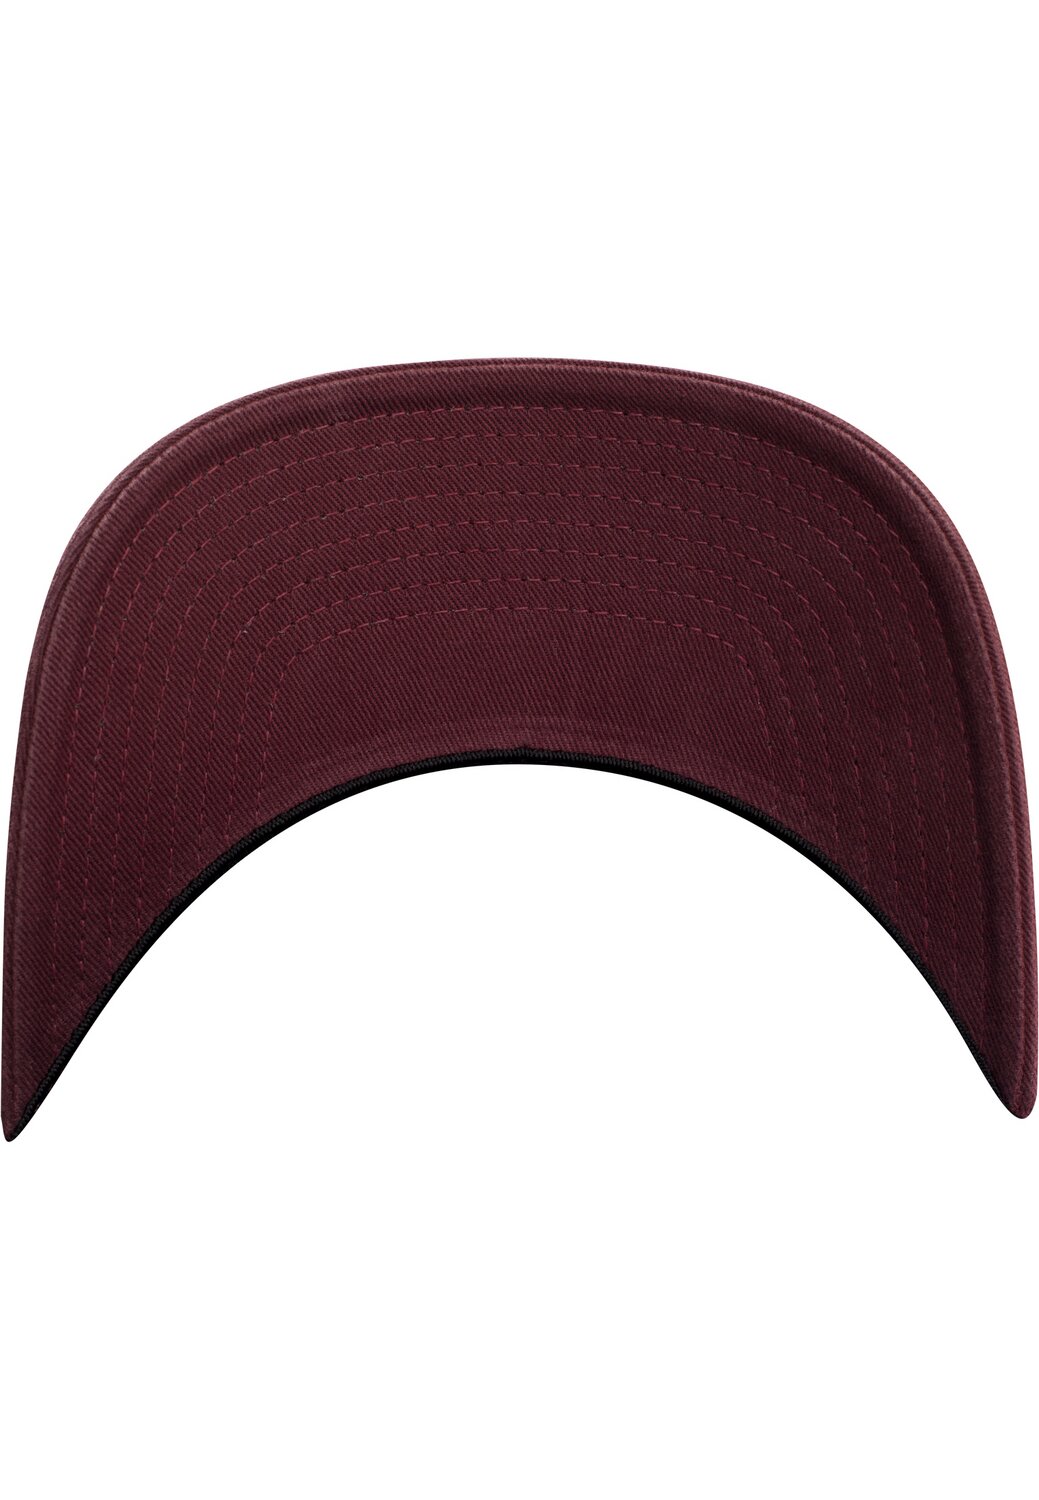 Hat Cotton maroon Flexfit | Washed MAXISCOOT Dad Garment